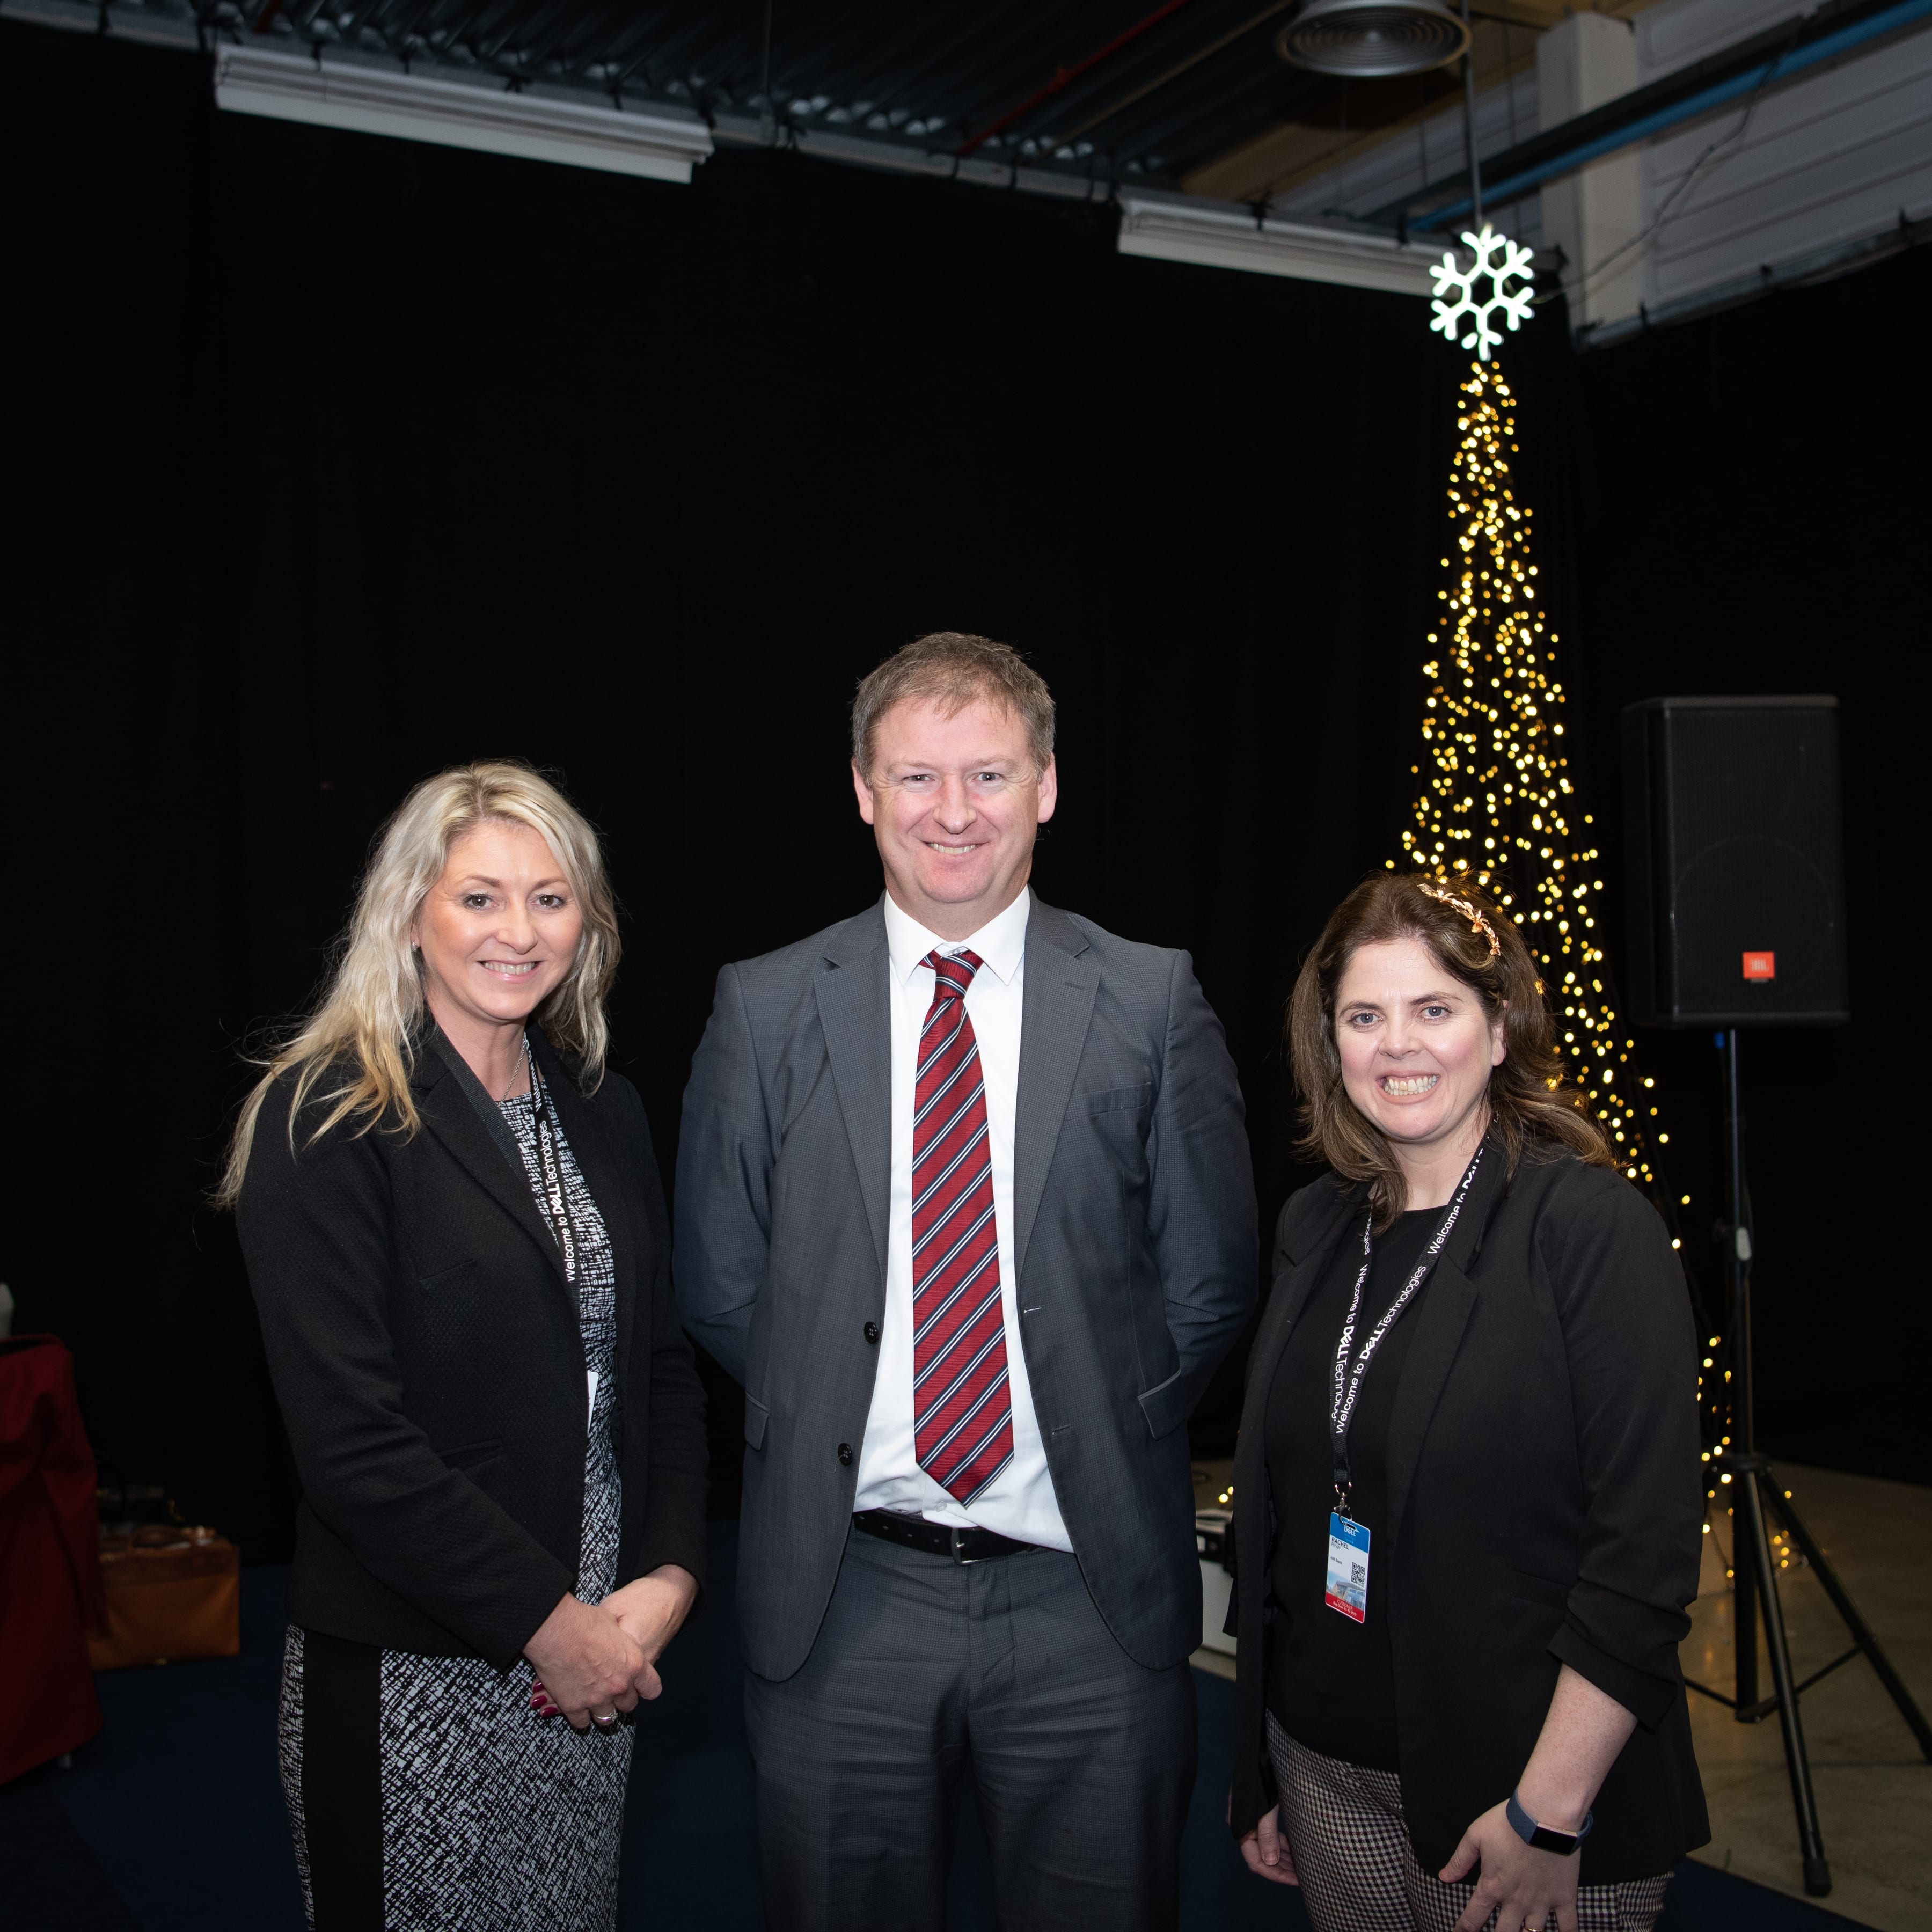 No repro fee- Regional Leaders Programme which took place on 11 December in Dell EMC, Guest speaker Eleanor McEvoy - From Left to Right: Jean Creagh, Damien Garrihy and Rachel Ryan all from AIB. 
Photo credit Shauna Kennedy